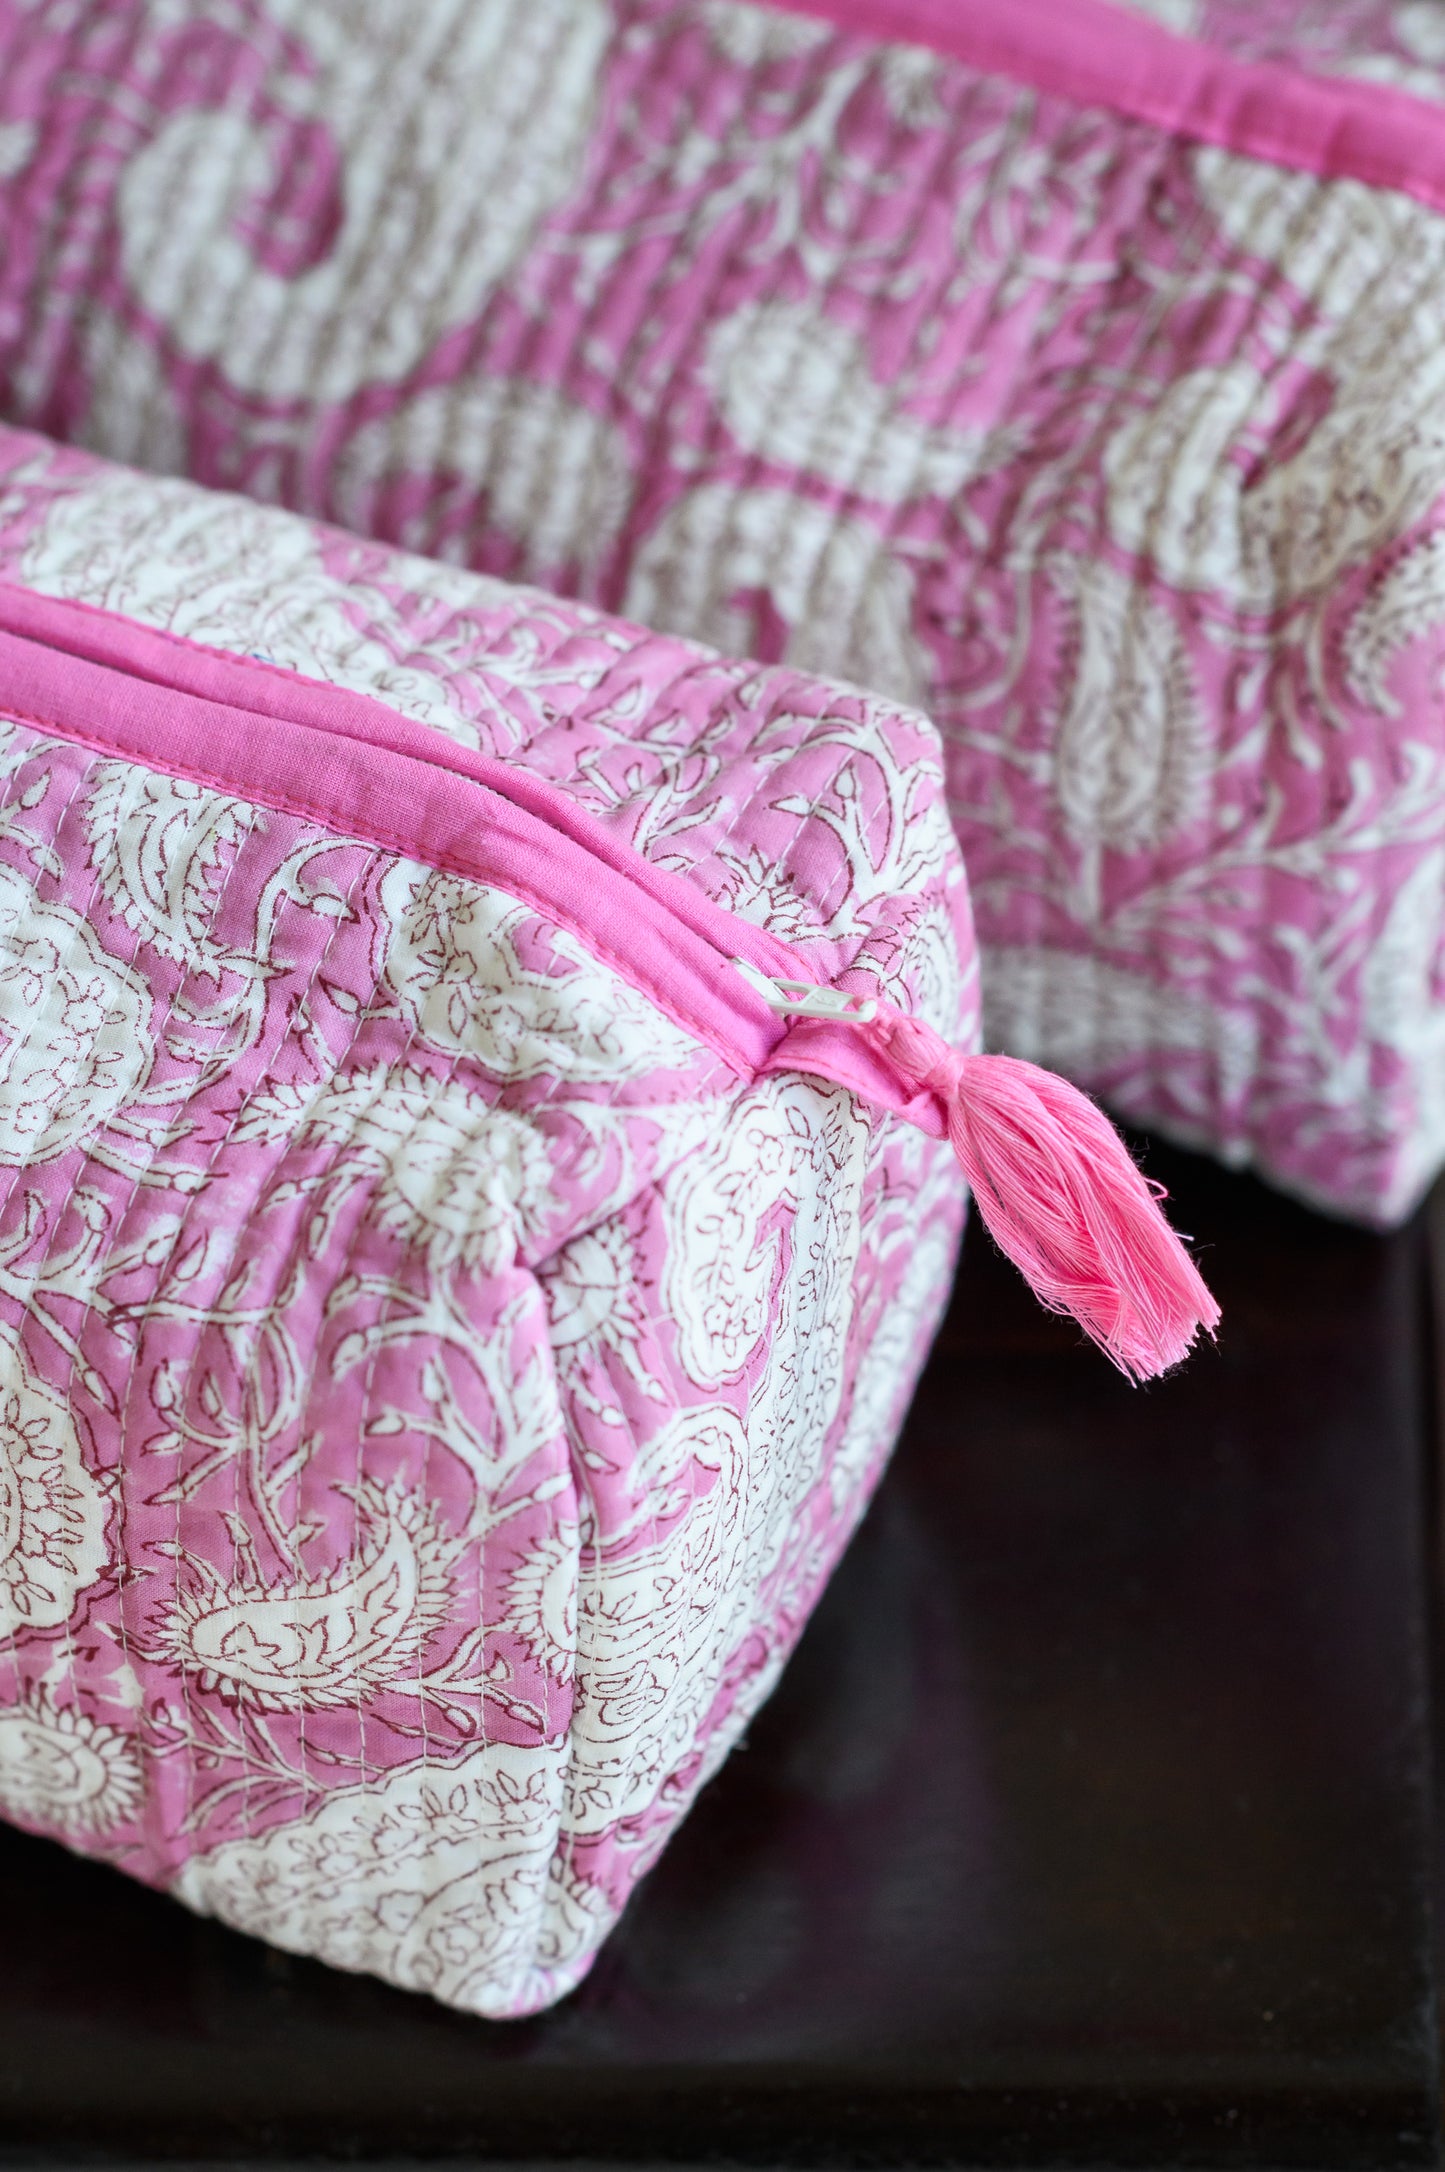 Block Print Quilted Cotton Washbag and Toiletry Bag